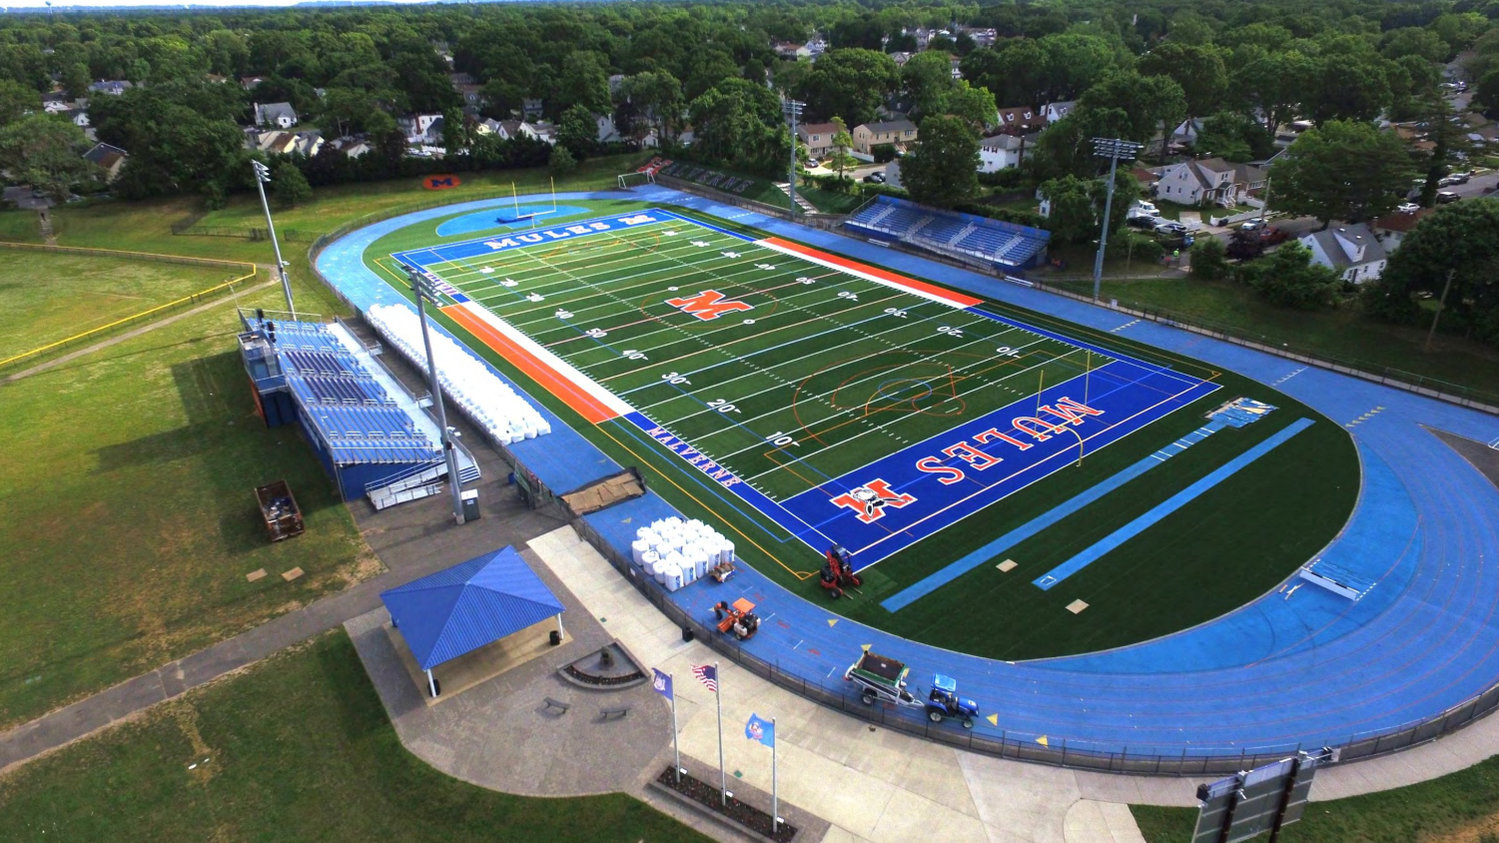 Overhauls to the Malverne Senior High School football field were carried out in May and early June in preparation of the school’s graduation ceremony. Renovations to the track did not begin until late May, and should be completed some time this month.